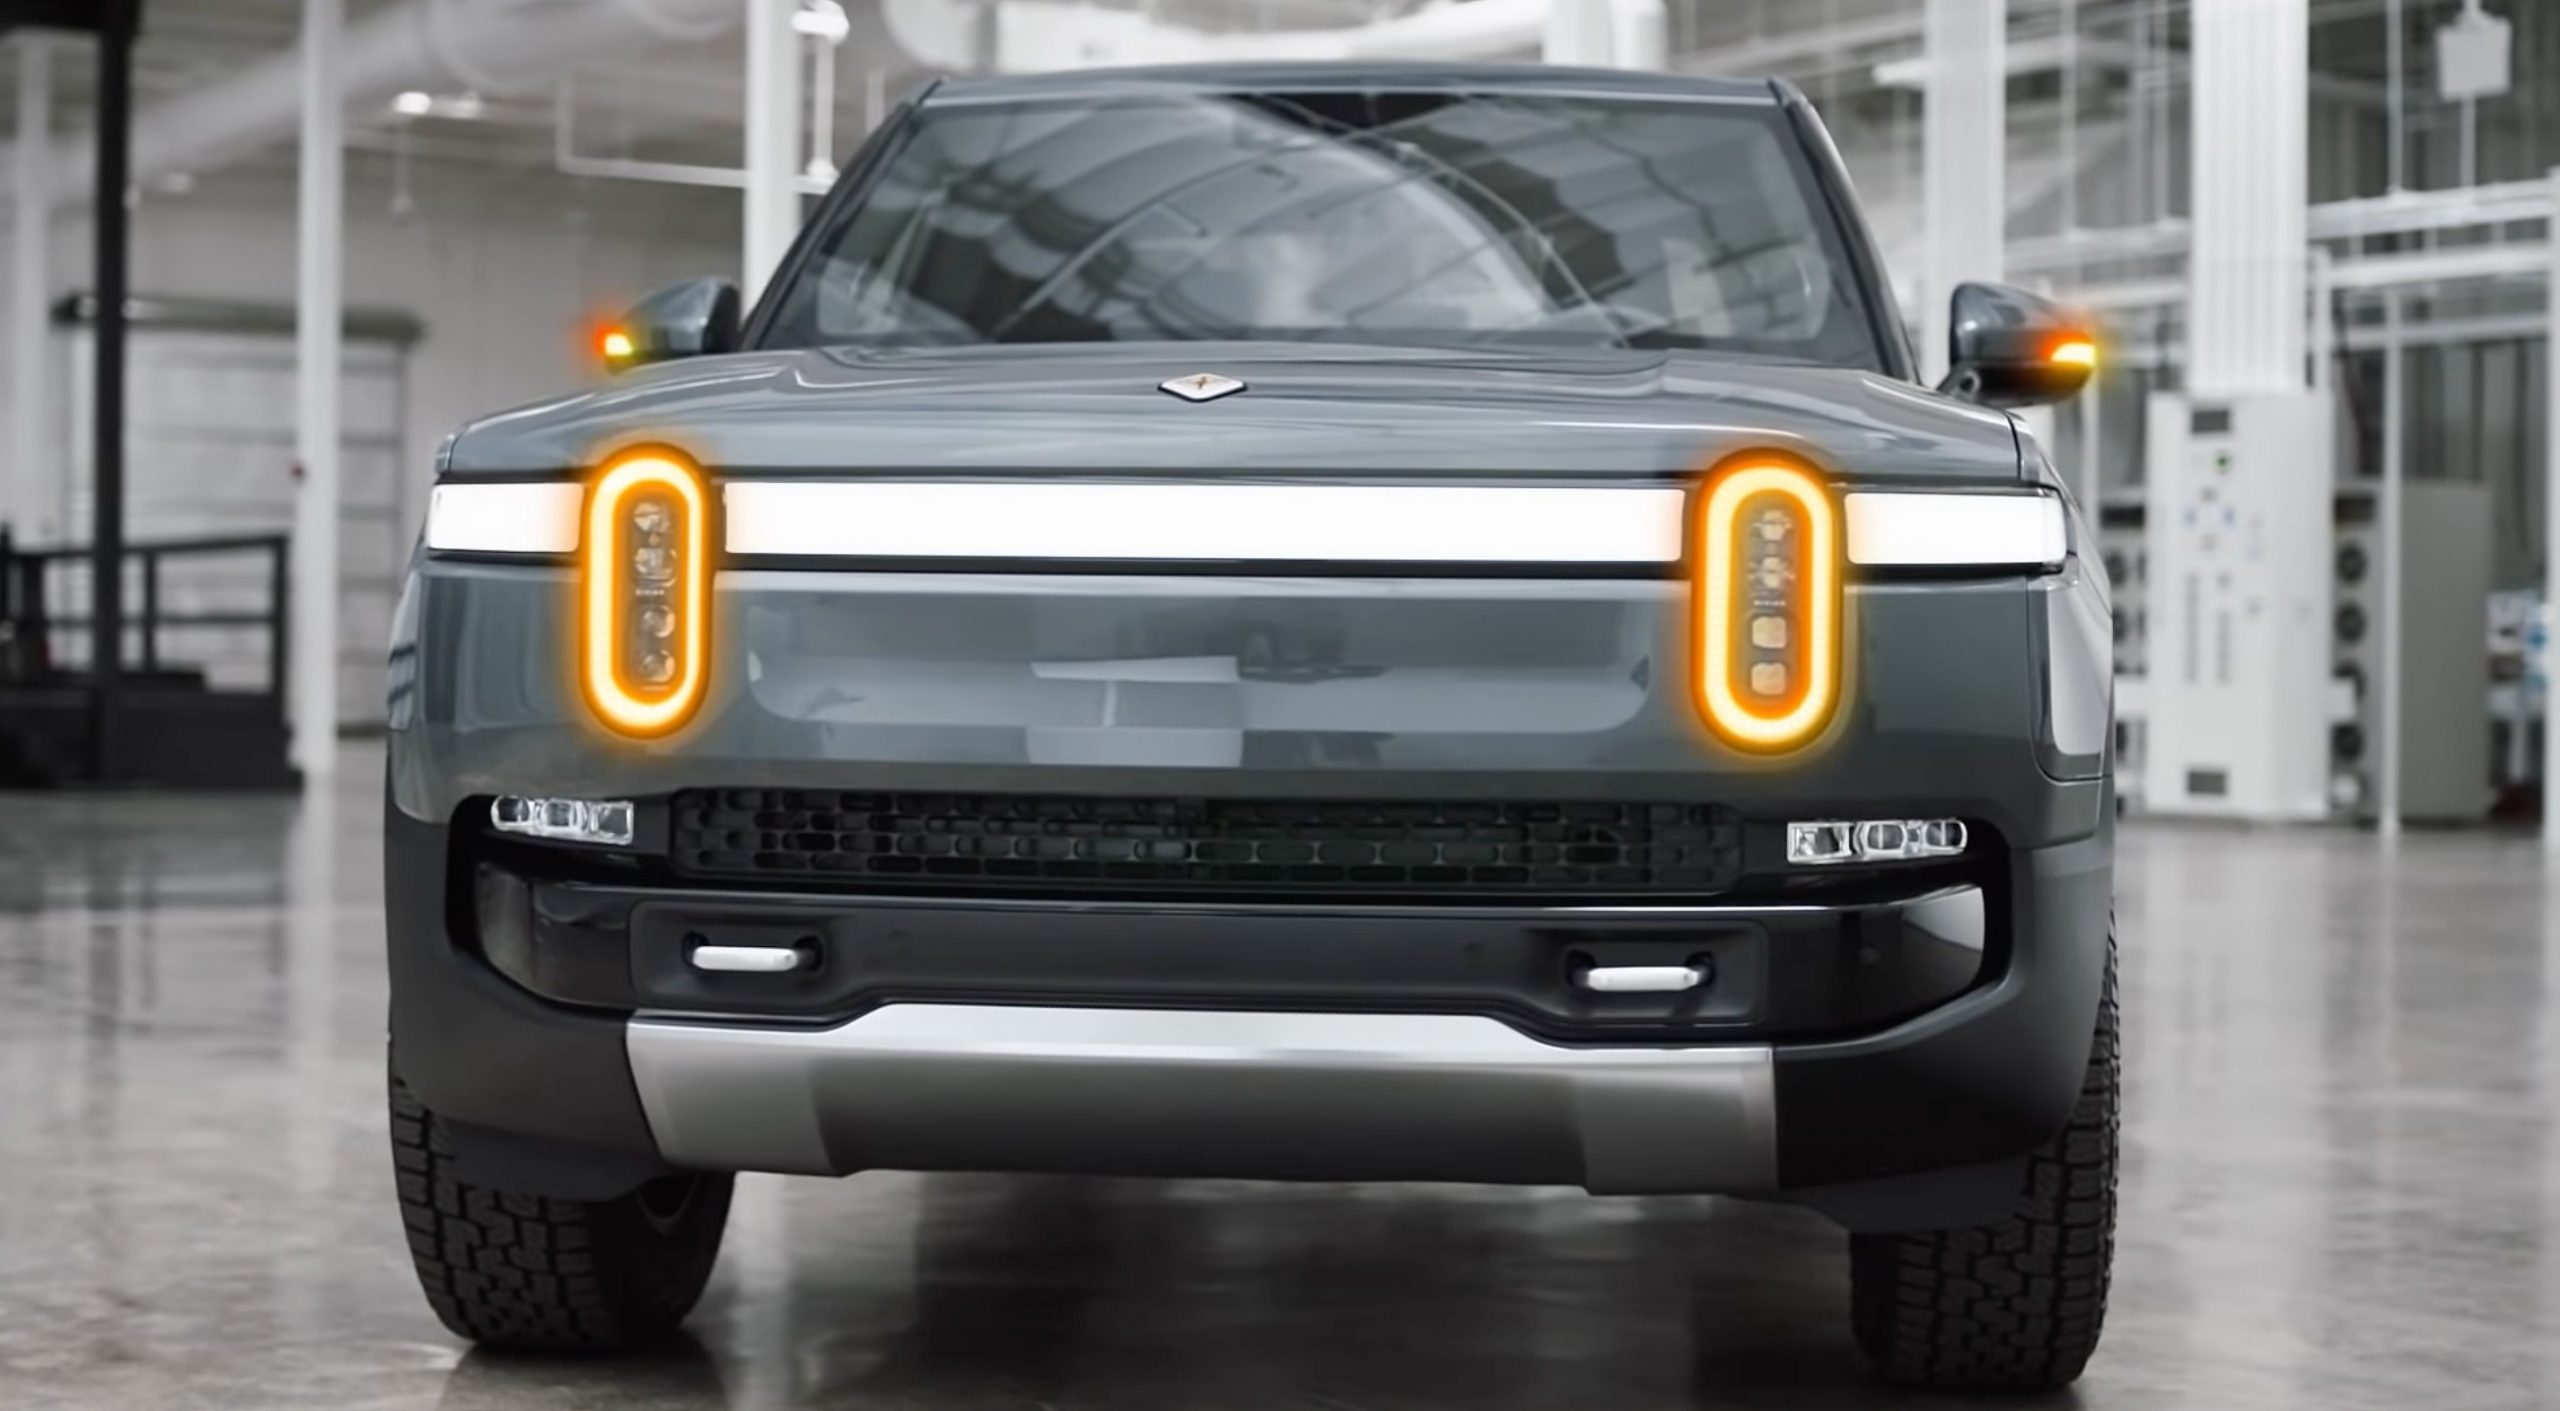 Rivian recalls almost 13,000 vehicles, emphasizes safety as top priority